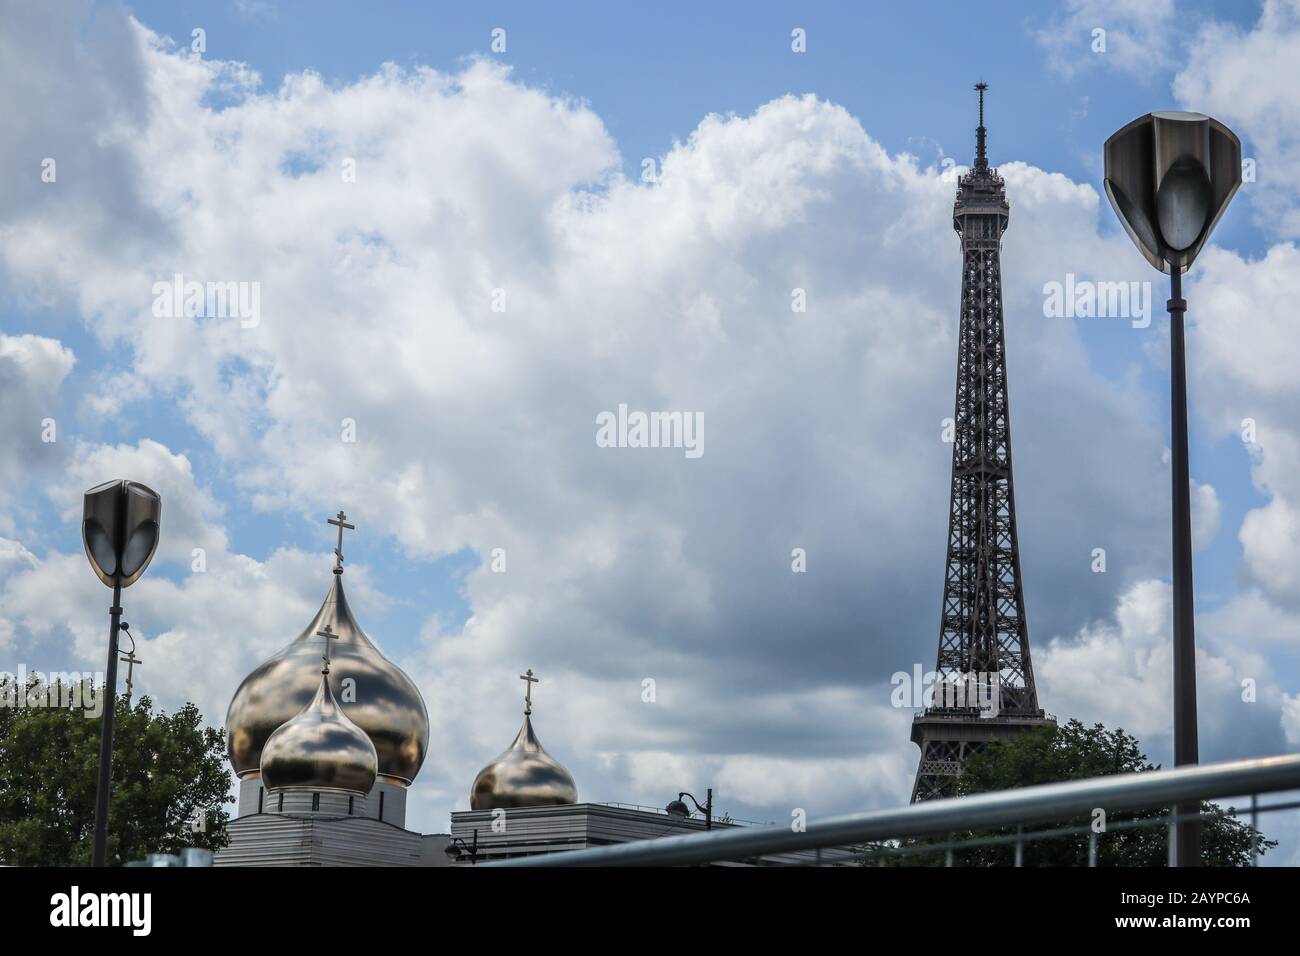 Eiffel Tower, street lamps and the Russian cathedral of the holy trinity in Paris, France, Europe Stock Photo